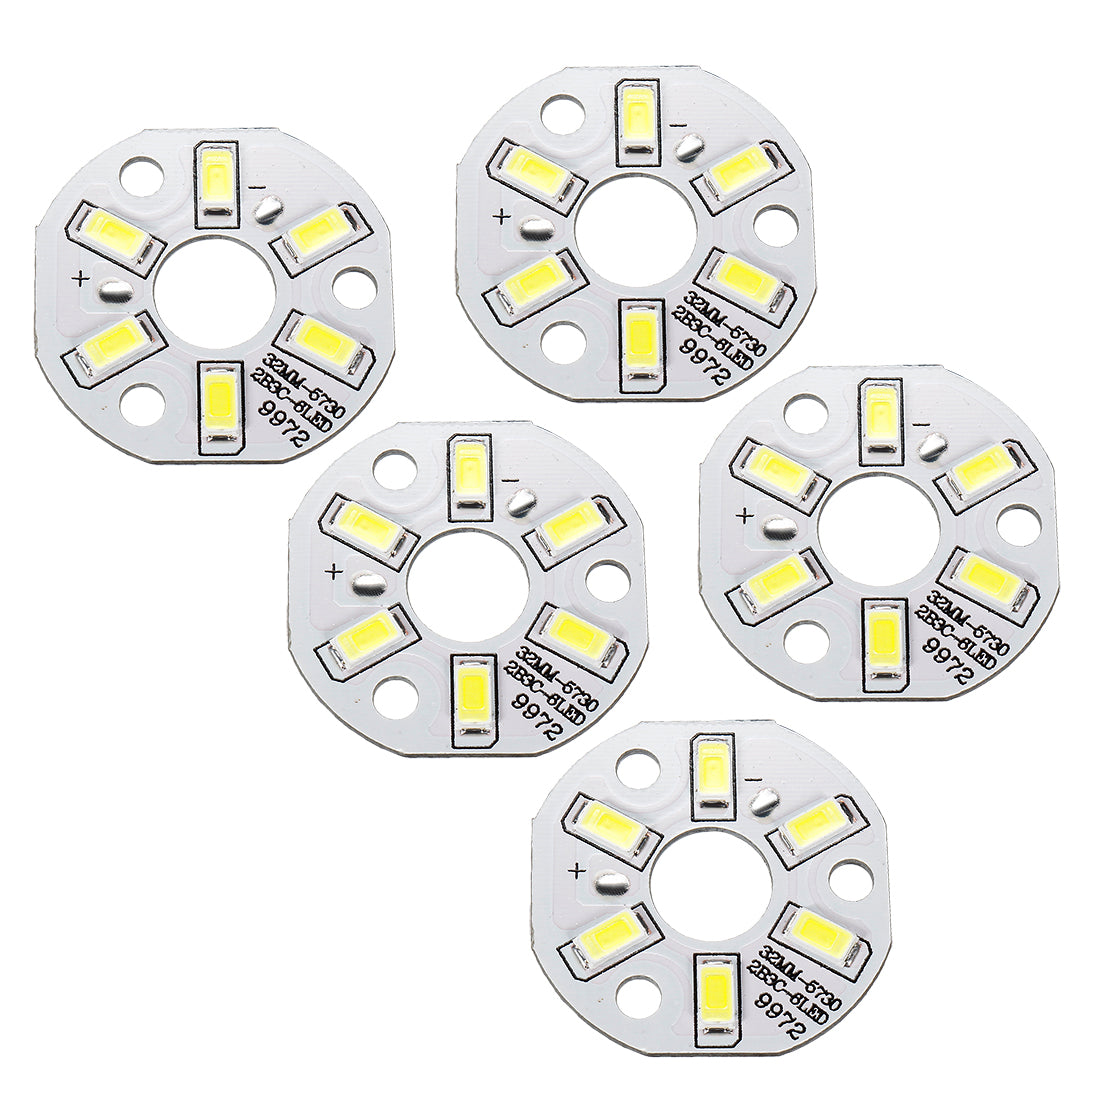 uxcell Uxcell 300mA 3W 6 LEDs 5730 Surface Mounted Devices LED Chip Module Aluminum Board Pure White Super Bright 32mm Dia 5pcs